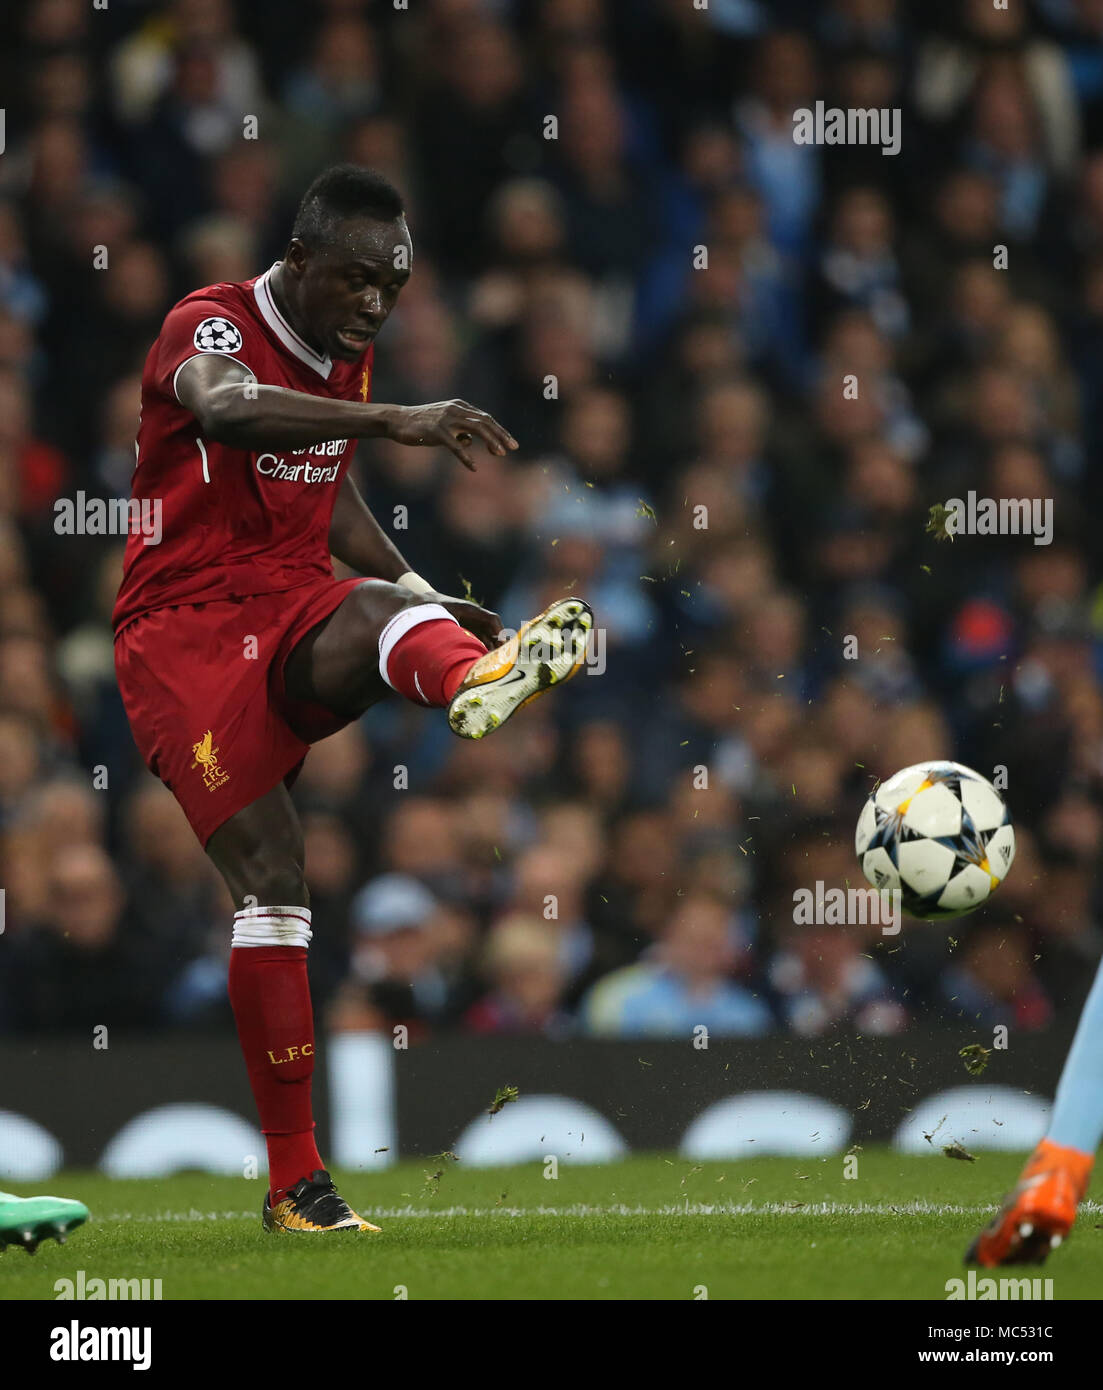 MANCHESTER, ENGLAND - APRIL 10: Sadio Mane of Liverpool during the Champions League quarter final second leg match between Manchester City and Liverpool at the Etihad Stadium on April 10, 2018 in Manchester, United Kingdom. Stock Photo